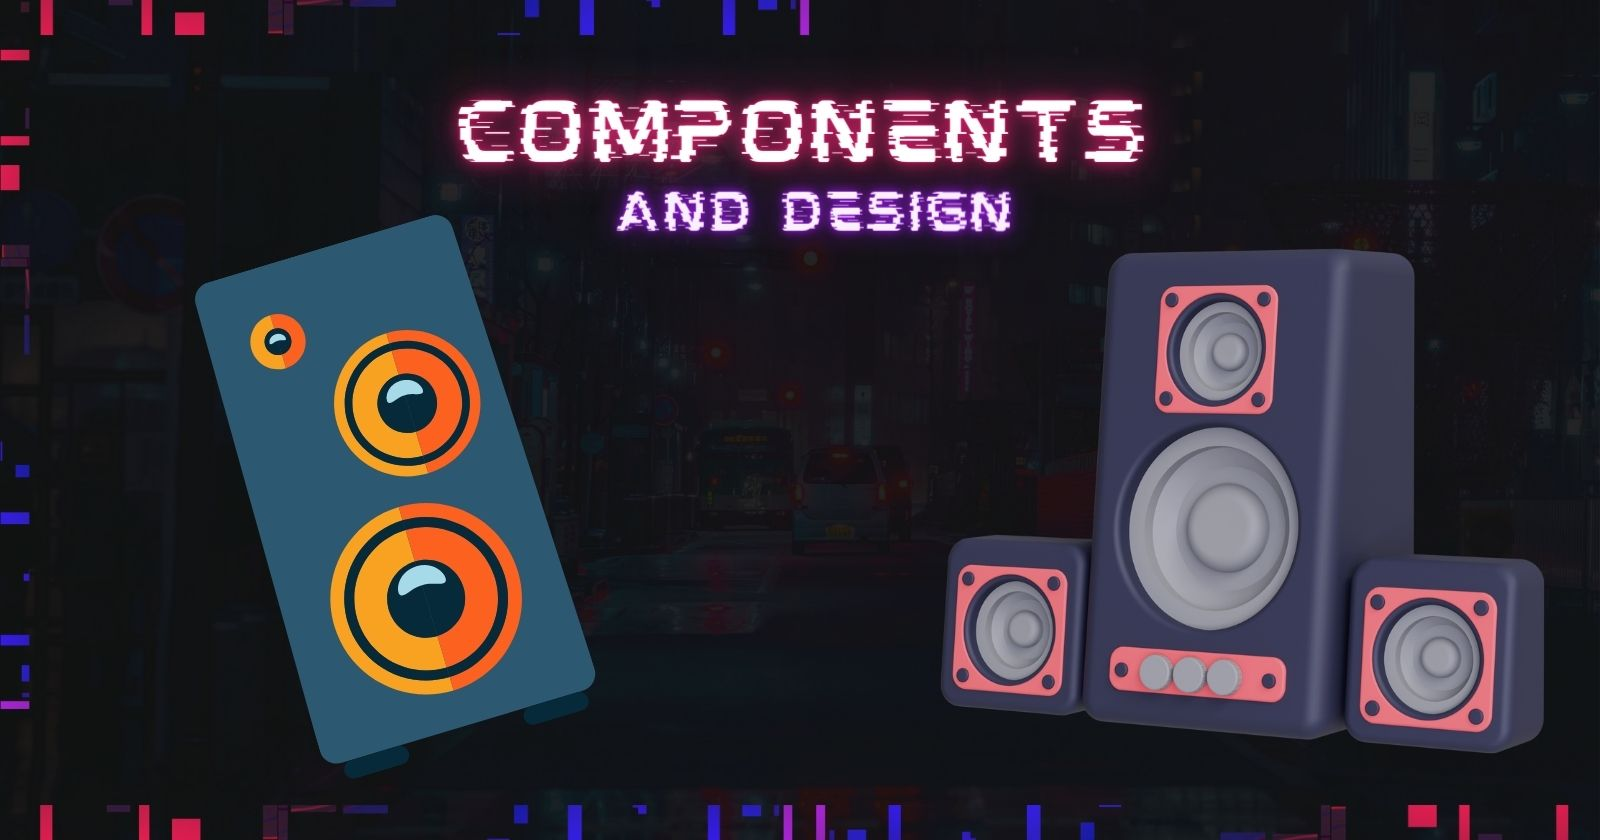 Components and Design